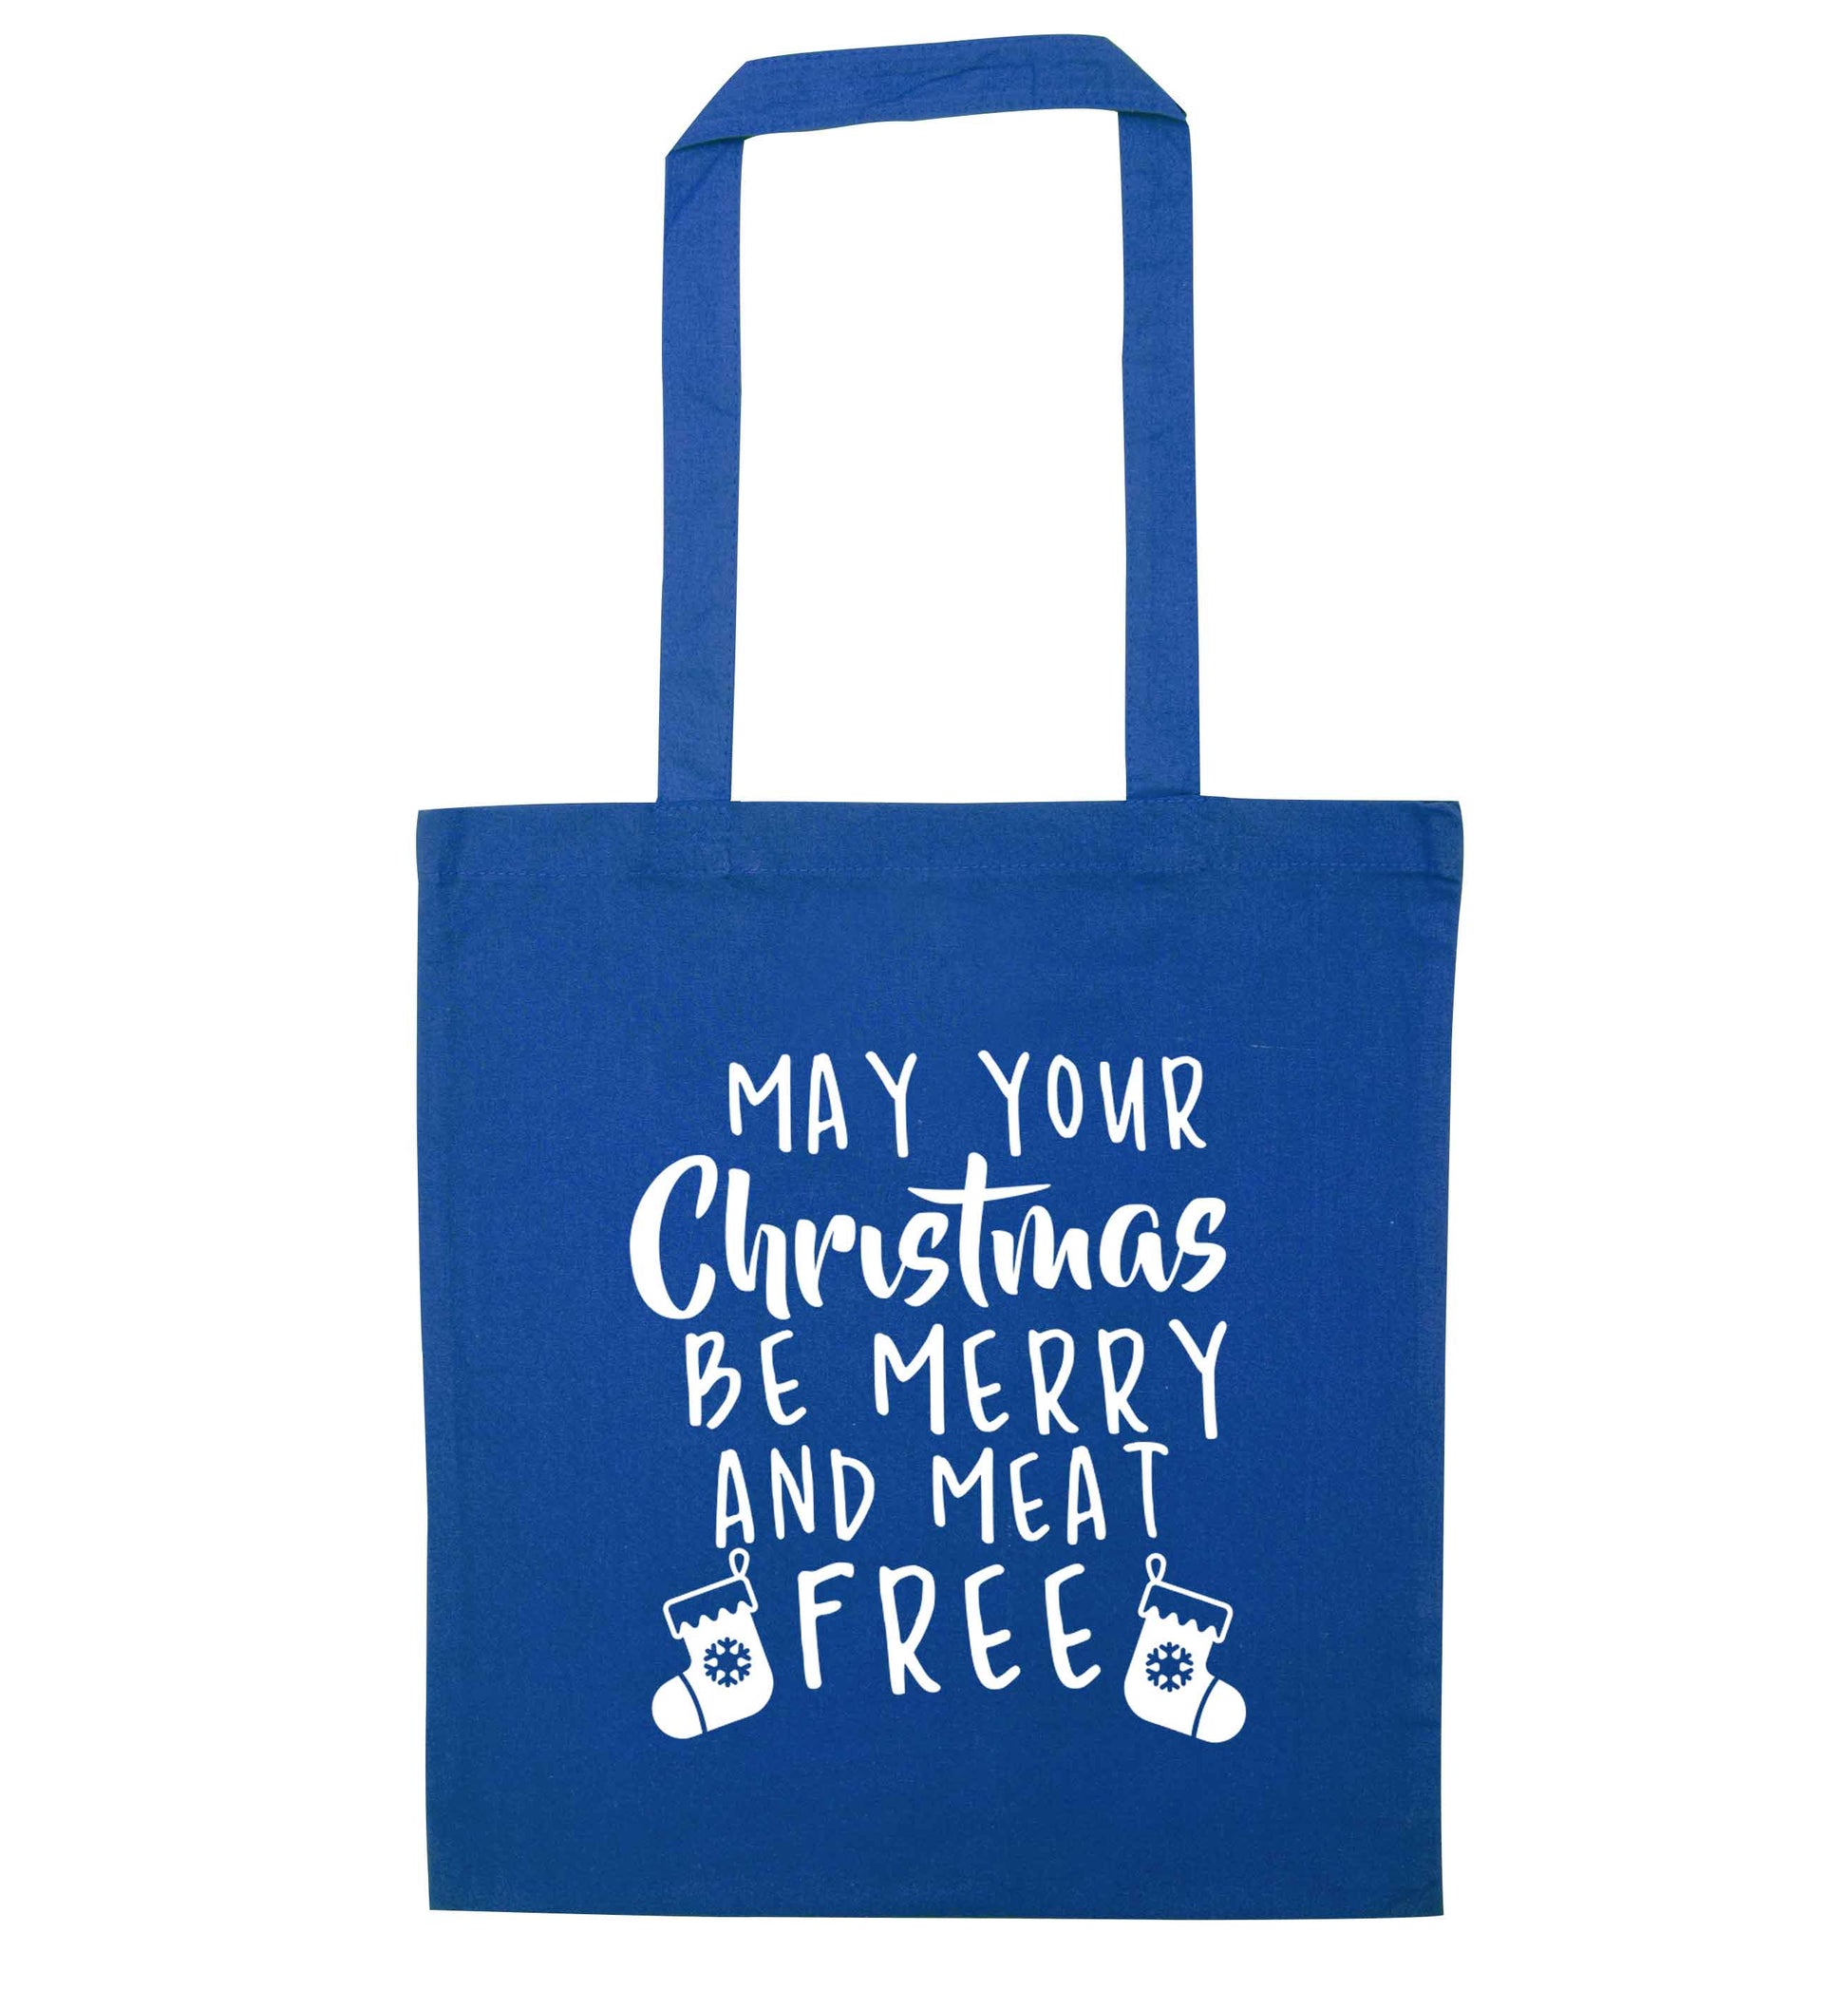 May your Christmas be merry and meat free blue tote bag